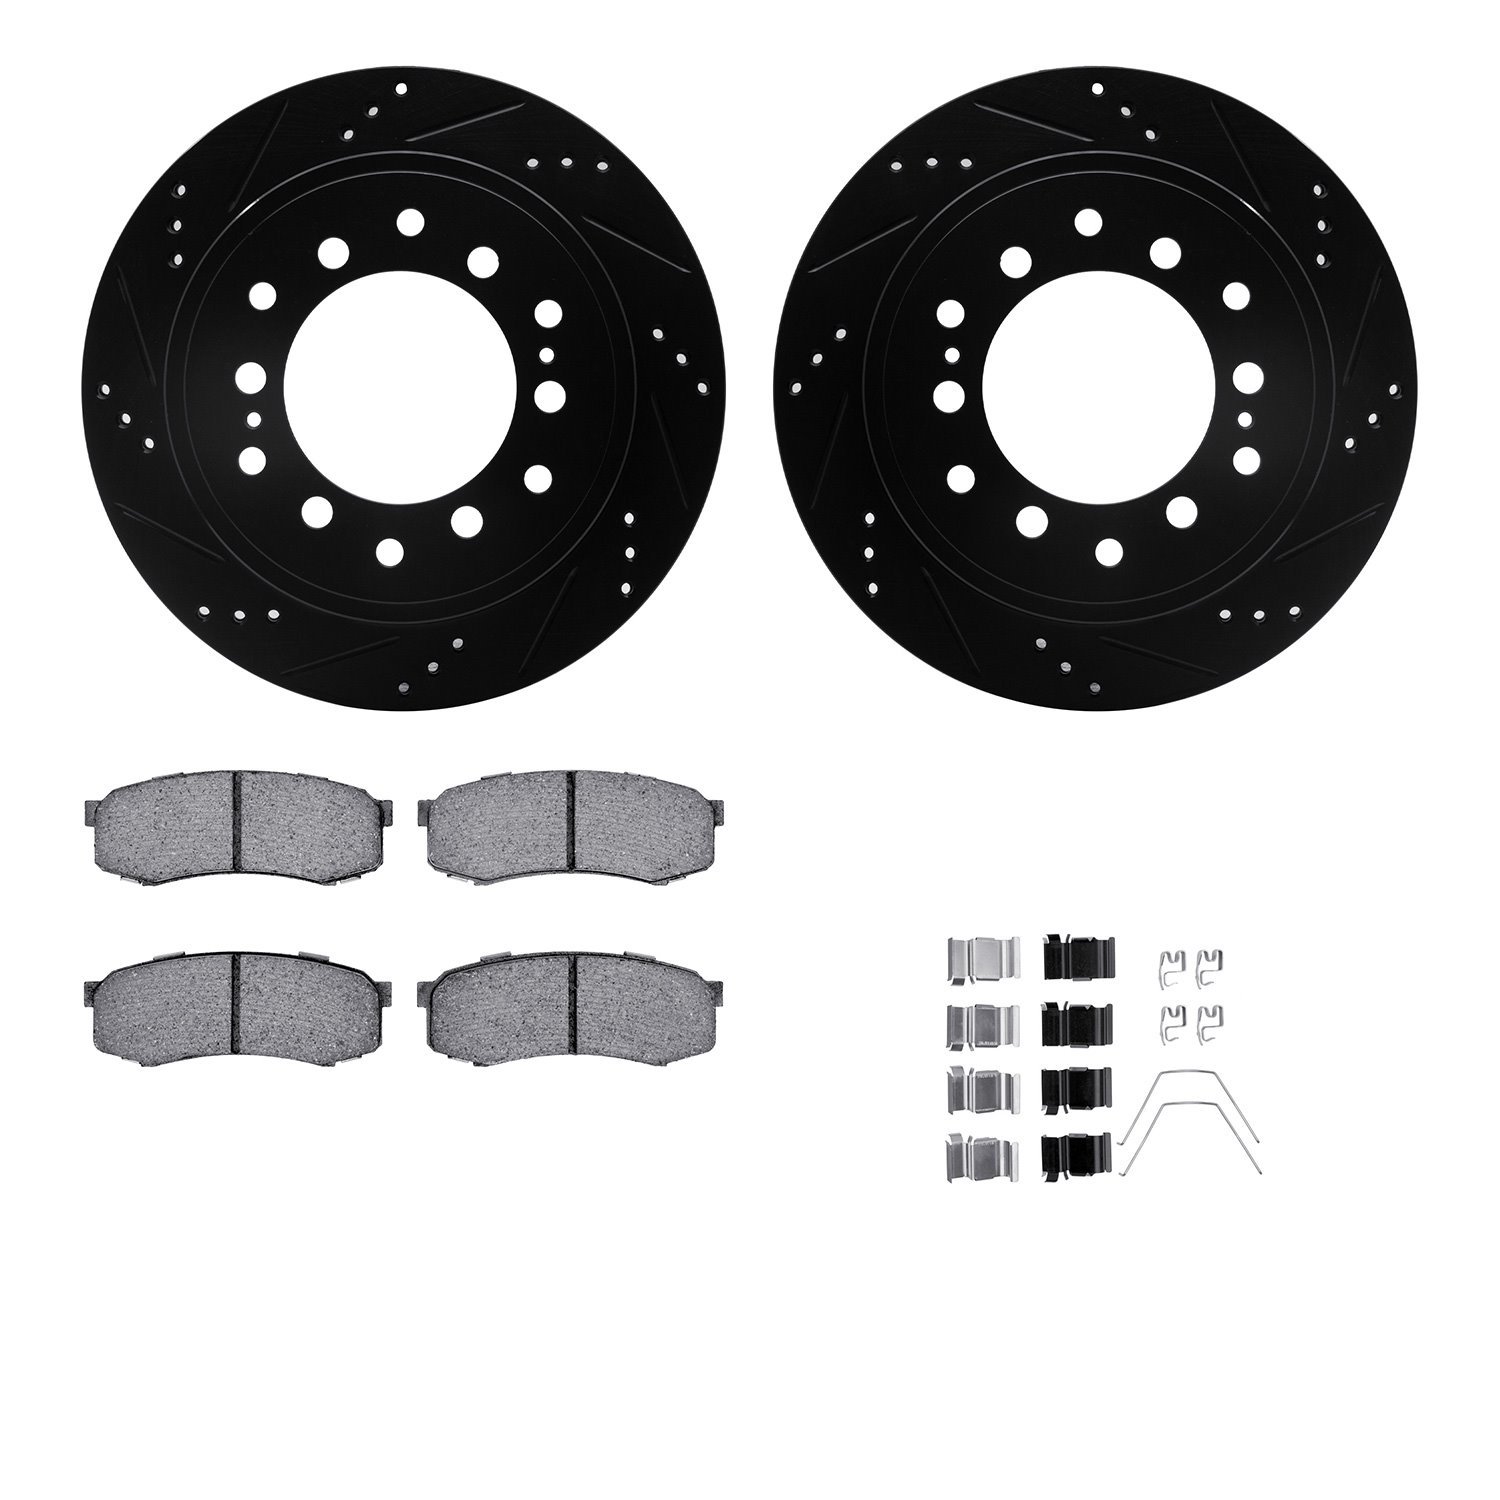 8412-76023 Drilled/Slotted Brake Rotors with Ultimate-Duty Brake Pads Kit & Hardware [Black], Fits Select Lexus/Toyota/Scion, Po